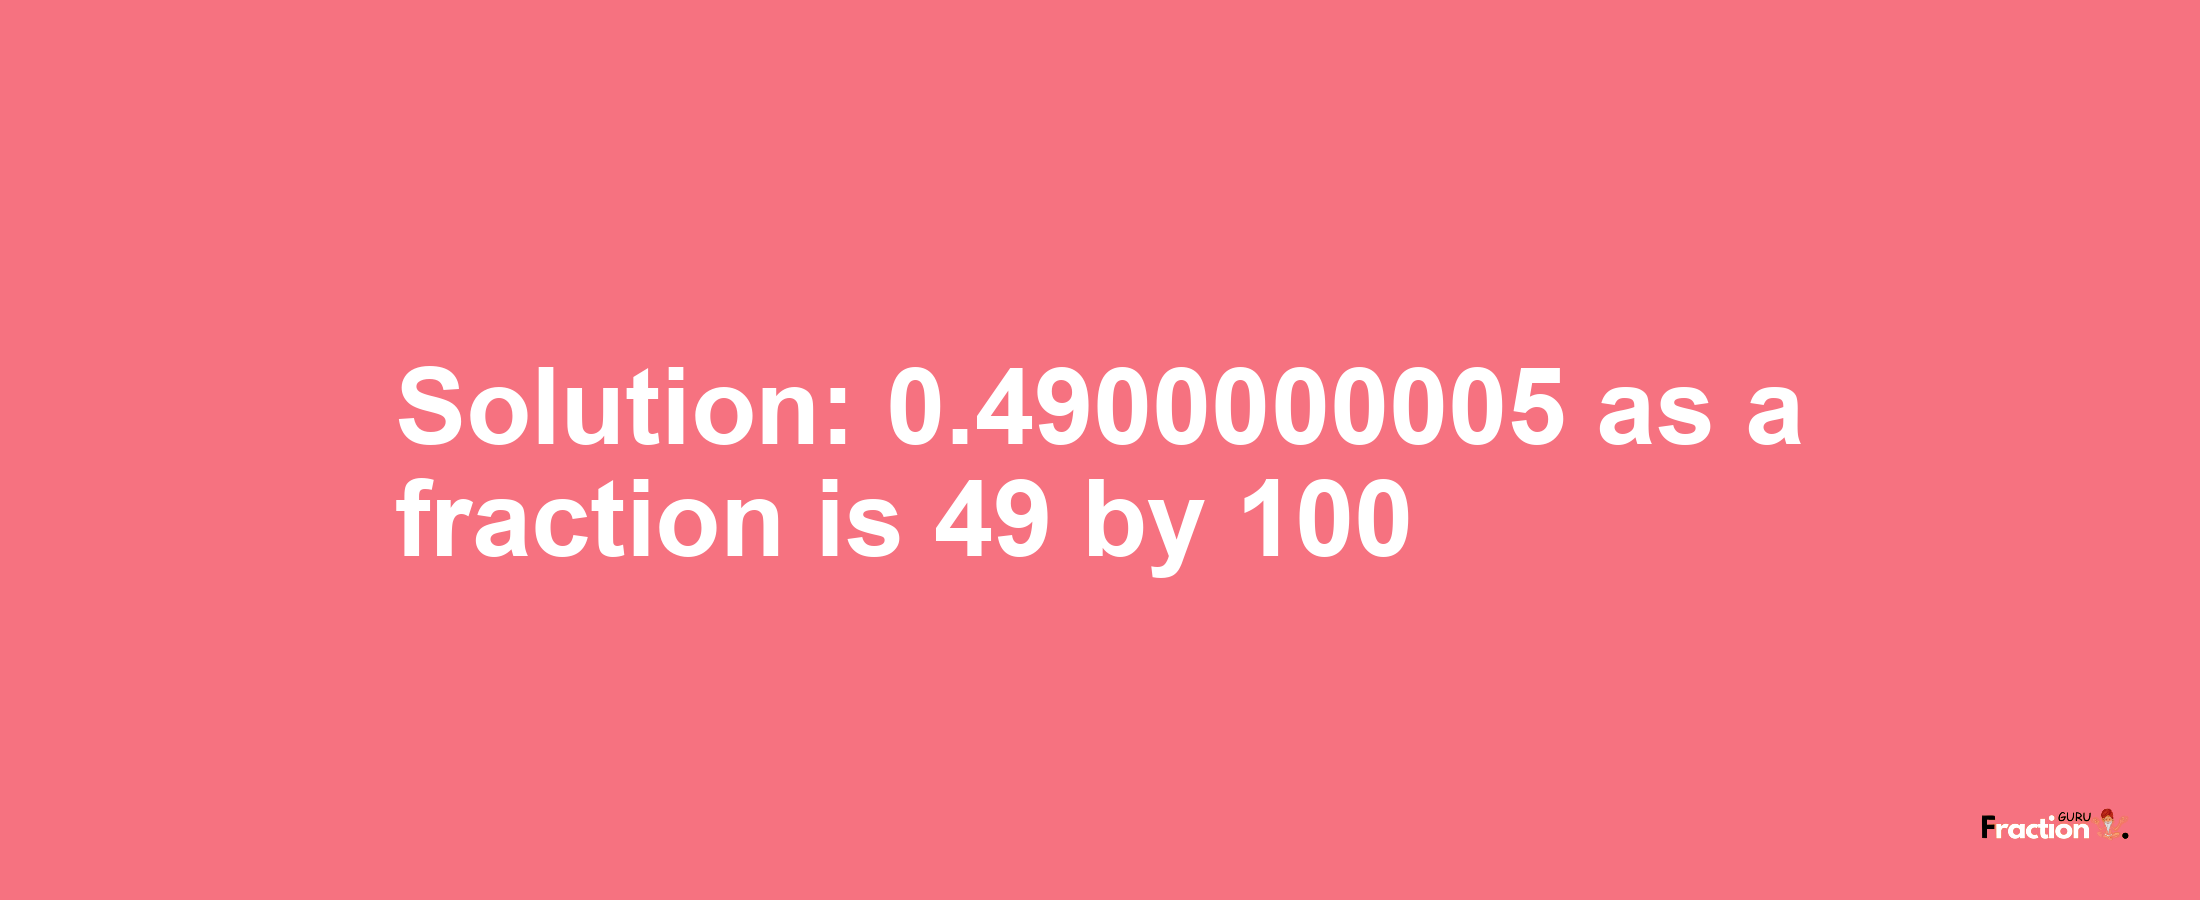 Solution:0.4900000005 as a fraction is 49/100